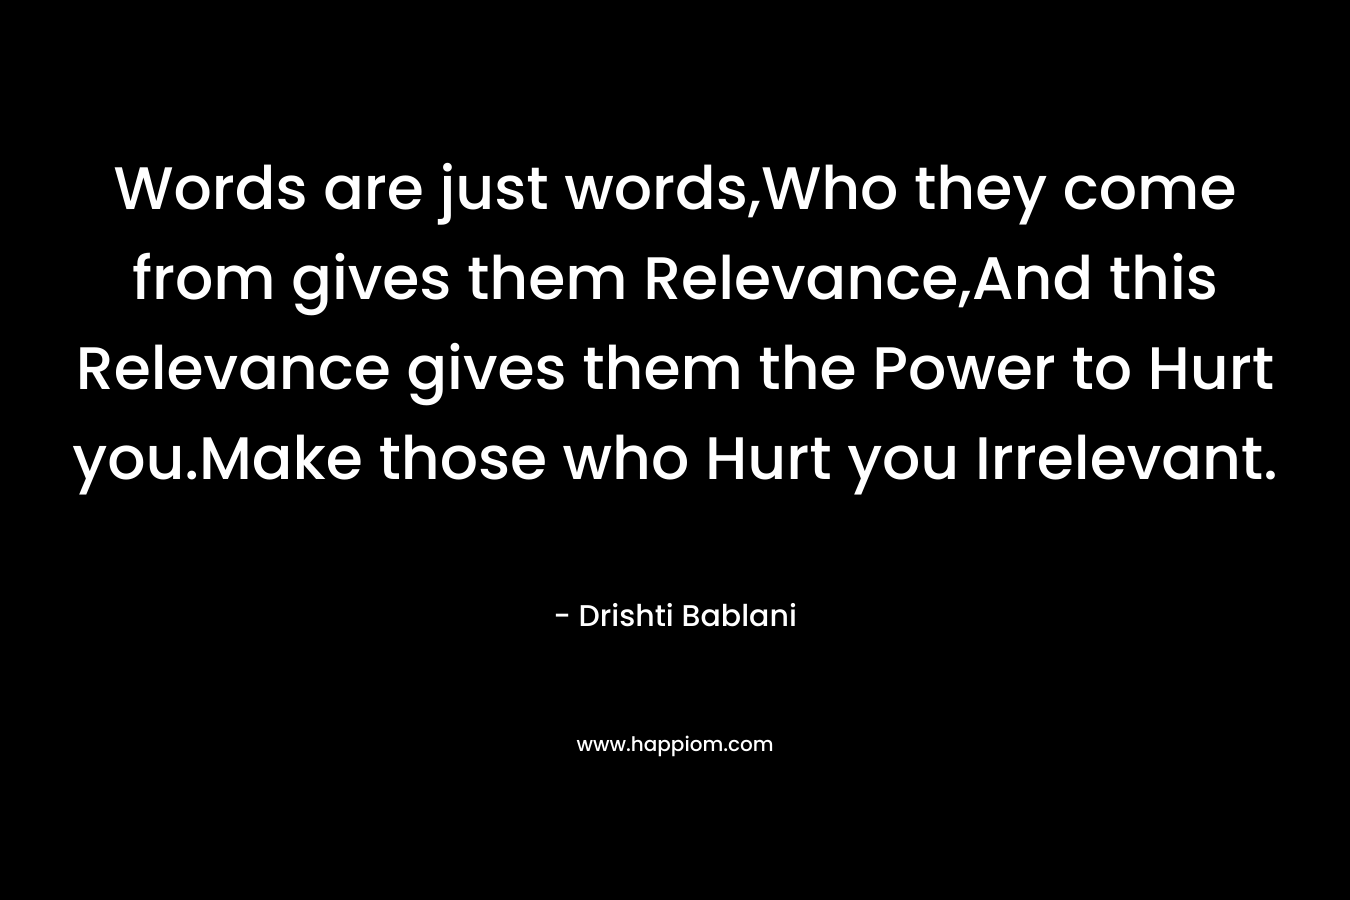 Words are just words,Who they come from gives them Relevance,And this Relevance gives them the Power to Hurt you.Make those who Hurt you Irrelevant. – Drishti Bablani